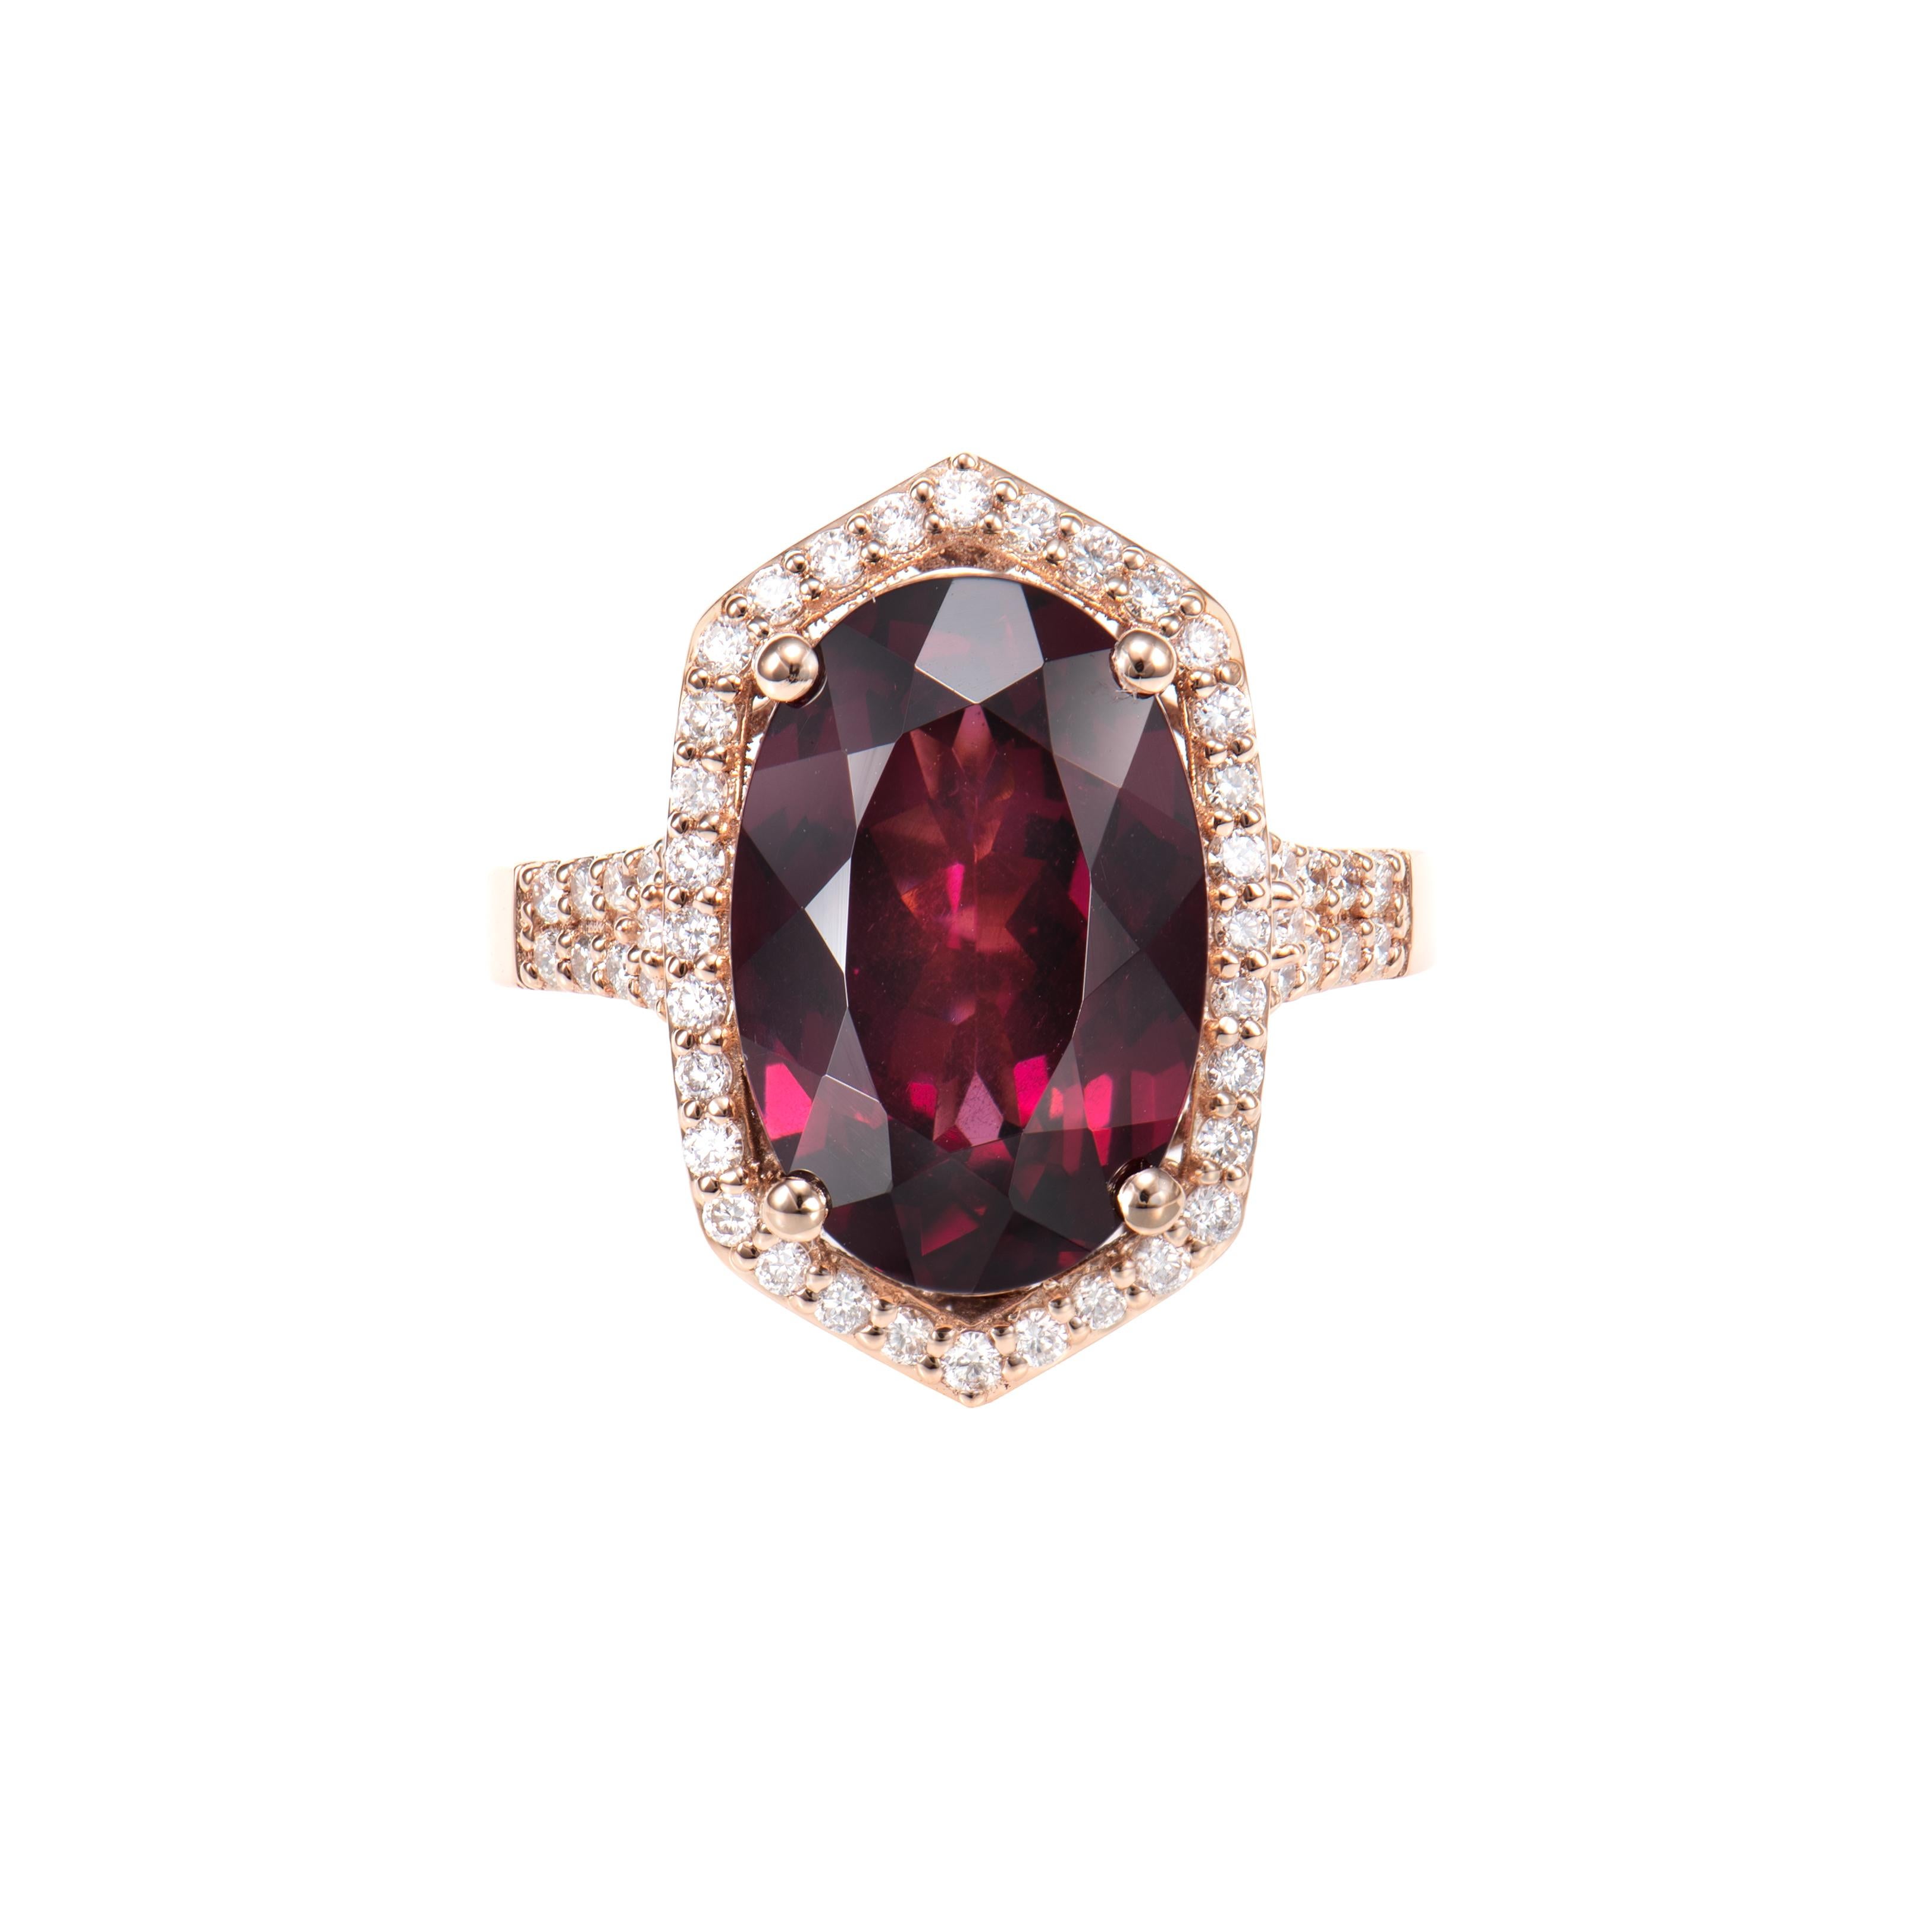 Contemporary 8.81 Carat Rhodolite Cocktail Ring in 18 Karat Rose Gold with White Diamond. For Sale